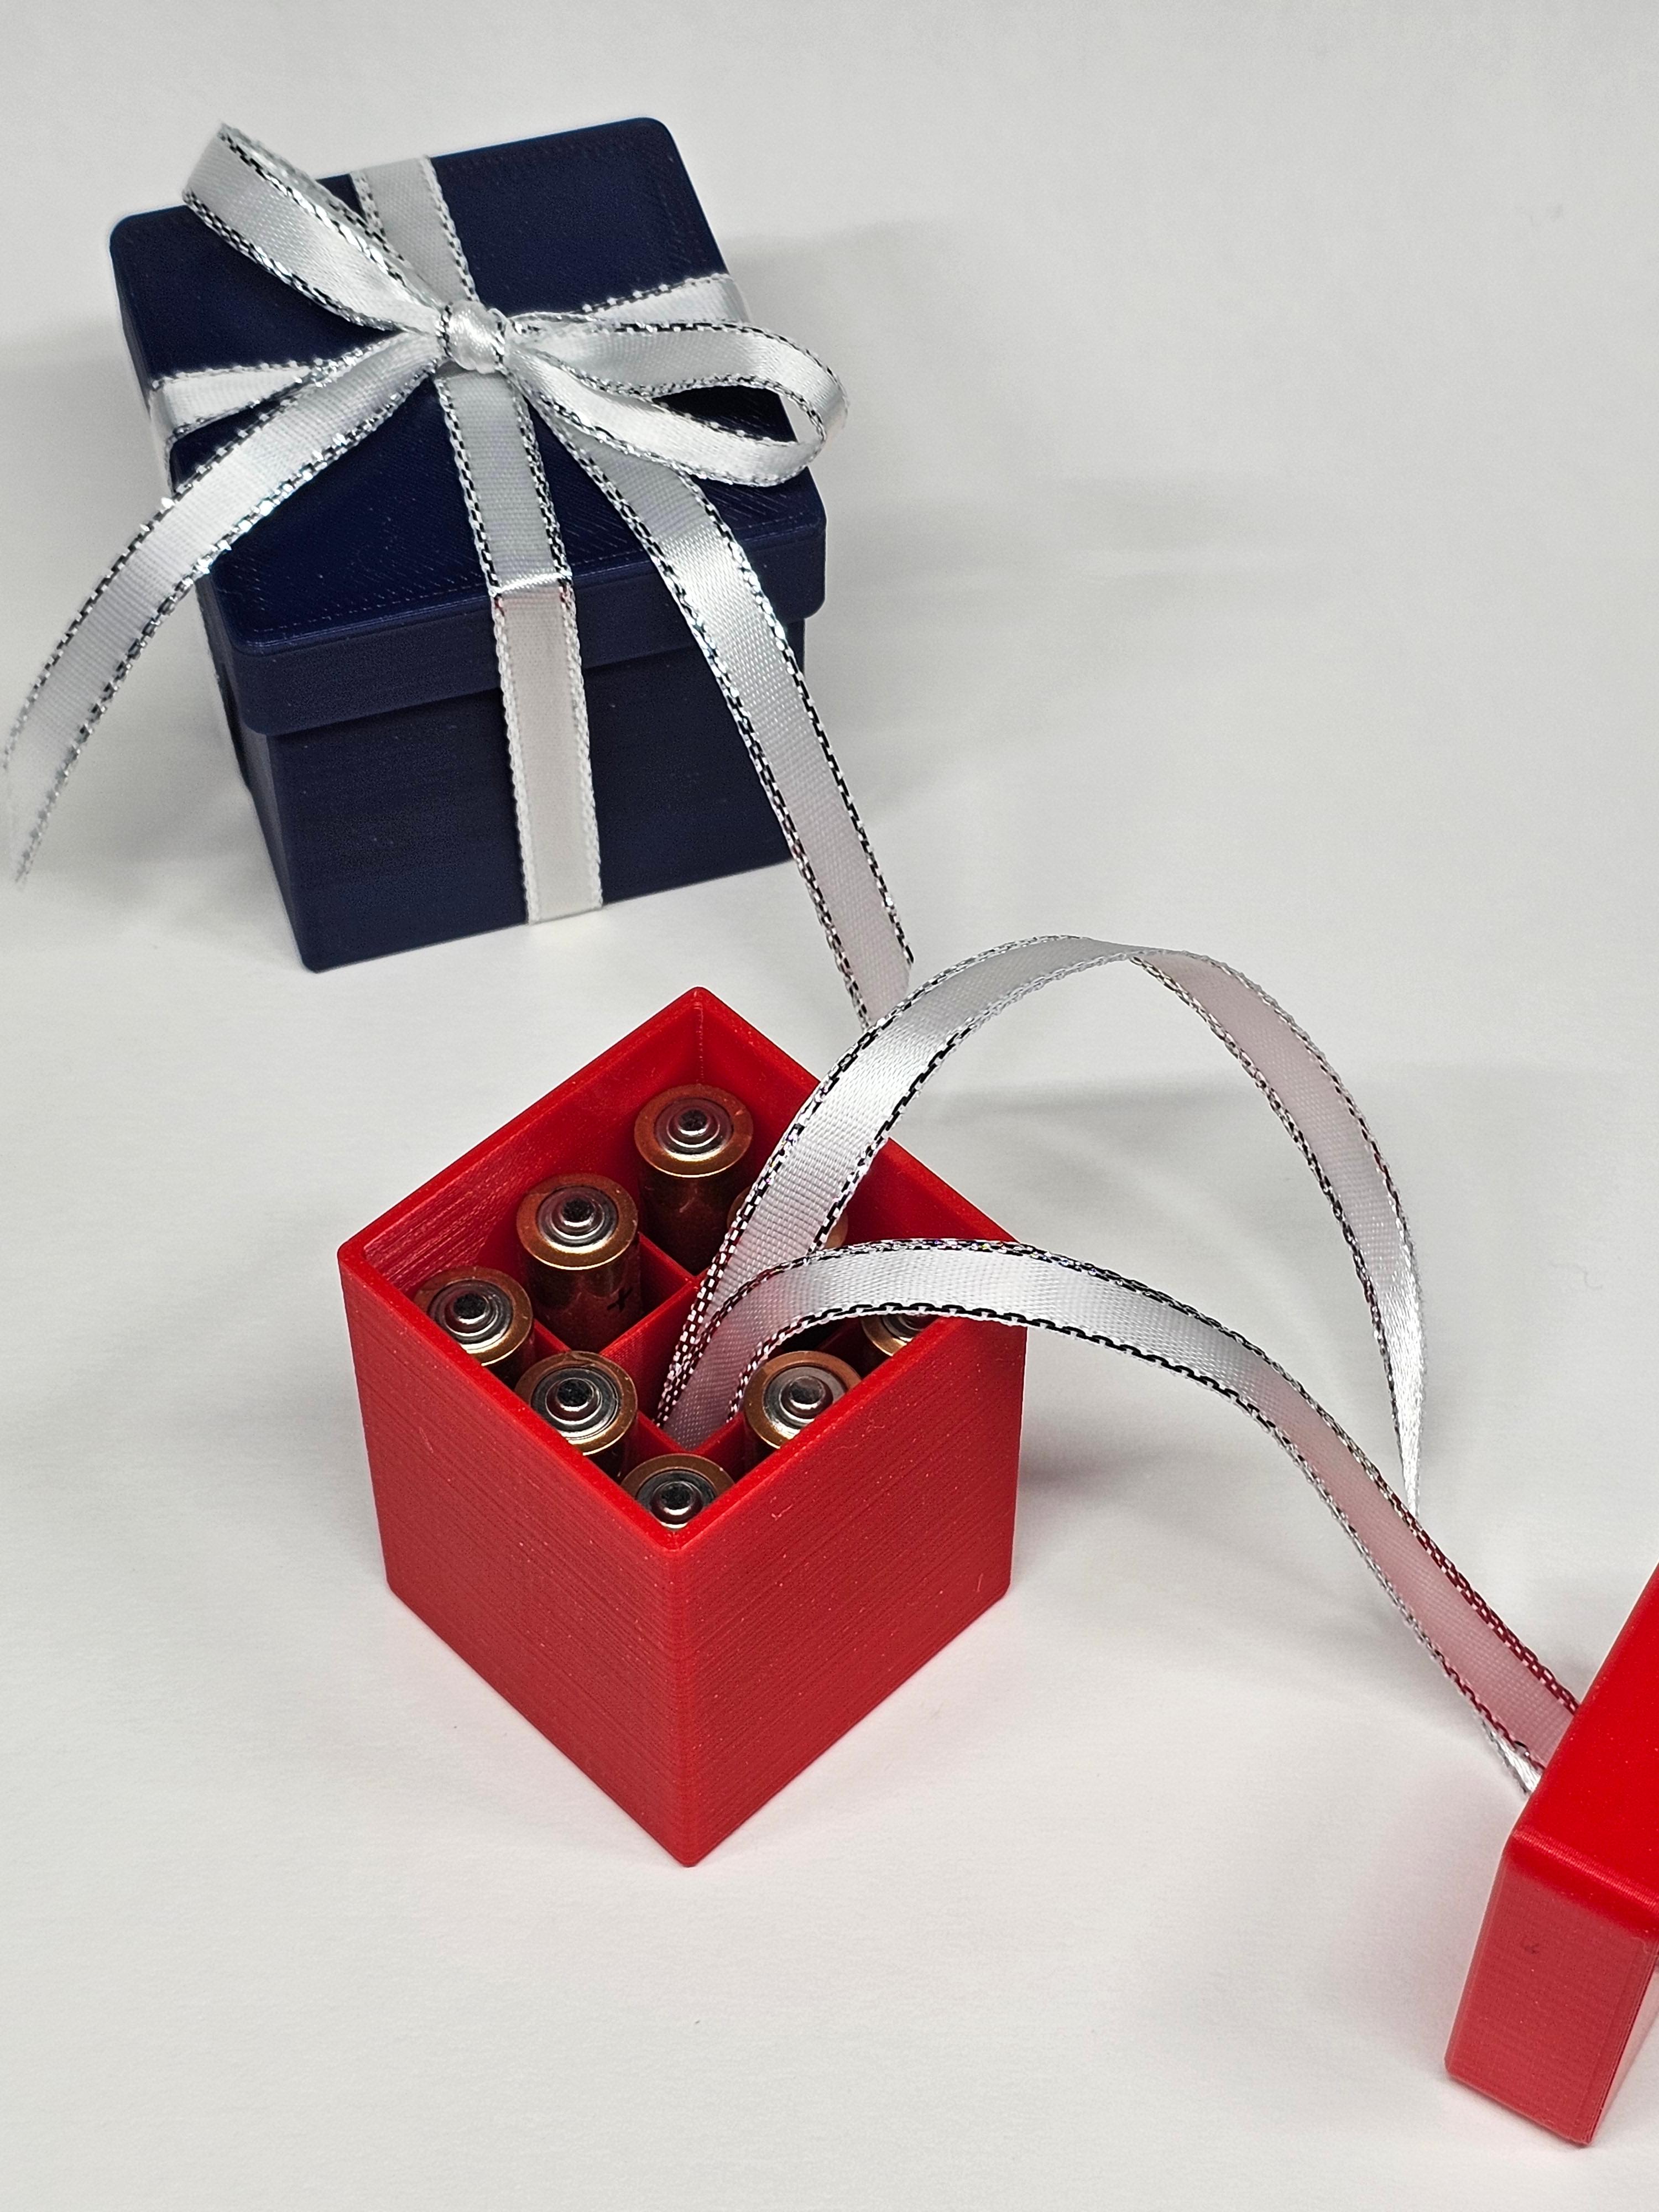 Small Gift Box w/ Insert for up to 8 AAA Batteries 3d model